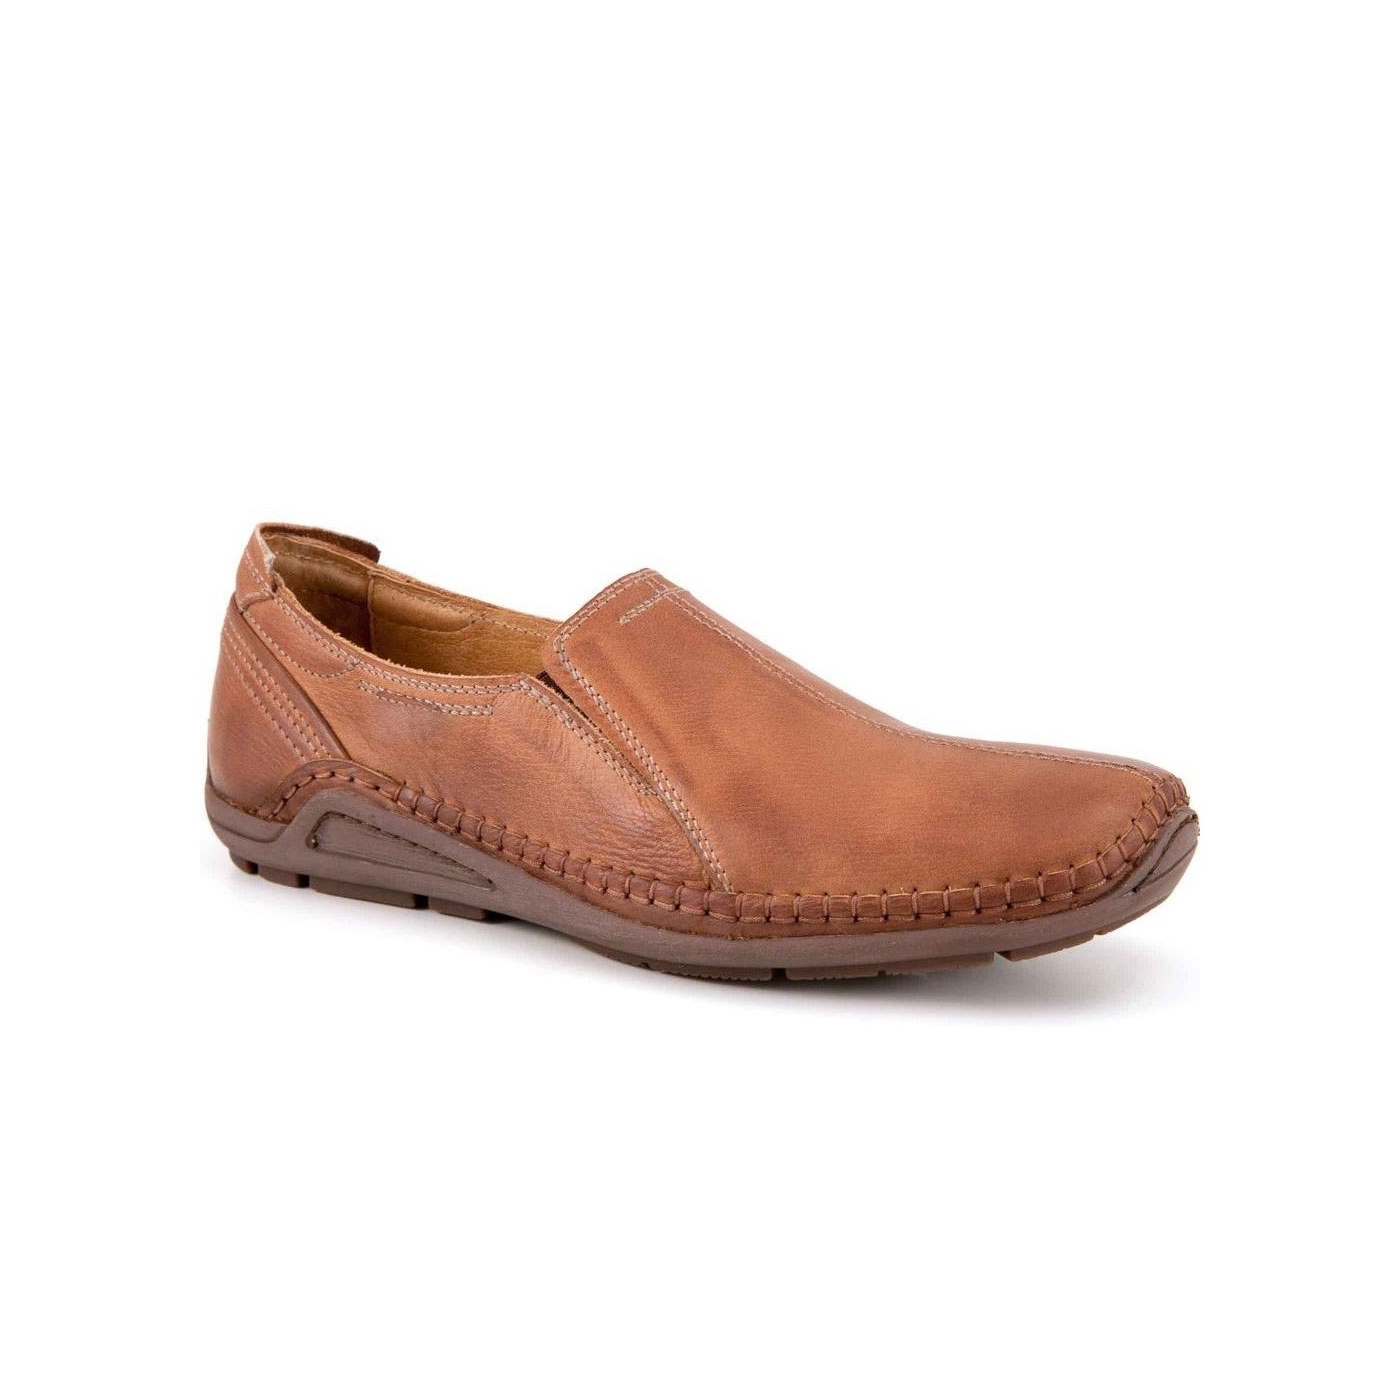 Pikolinos Tan acer mens casual slip on shoes